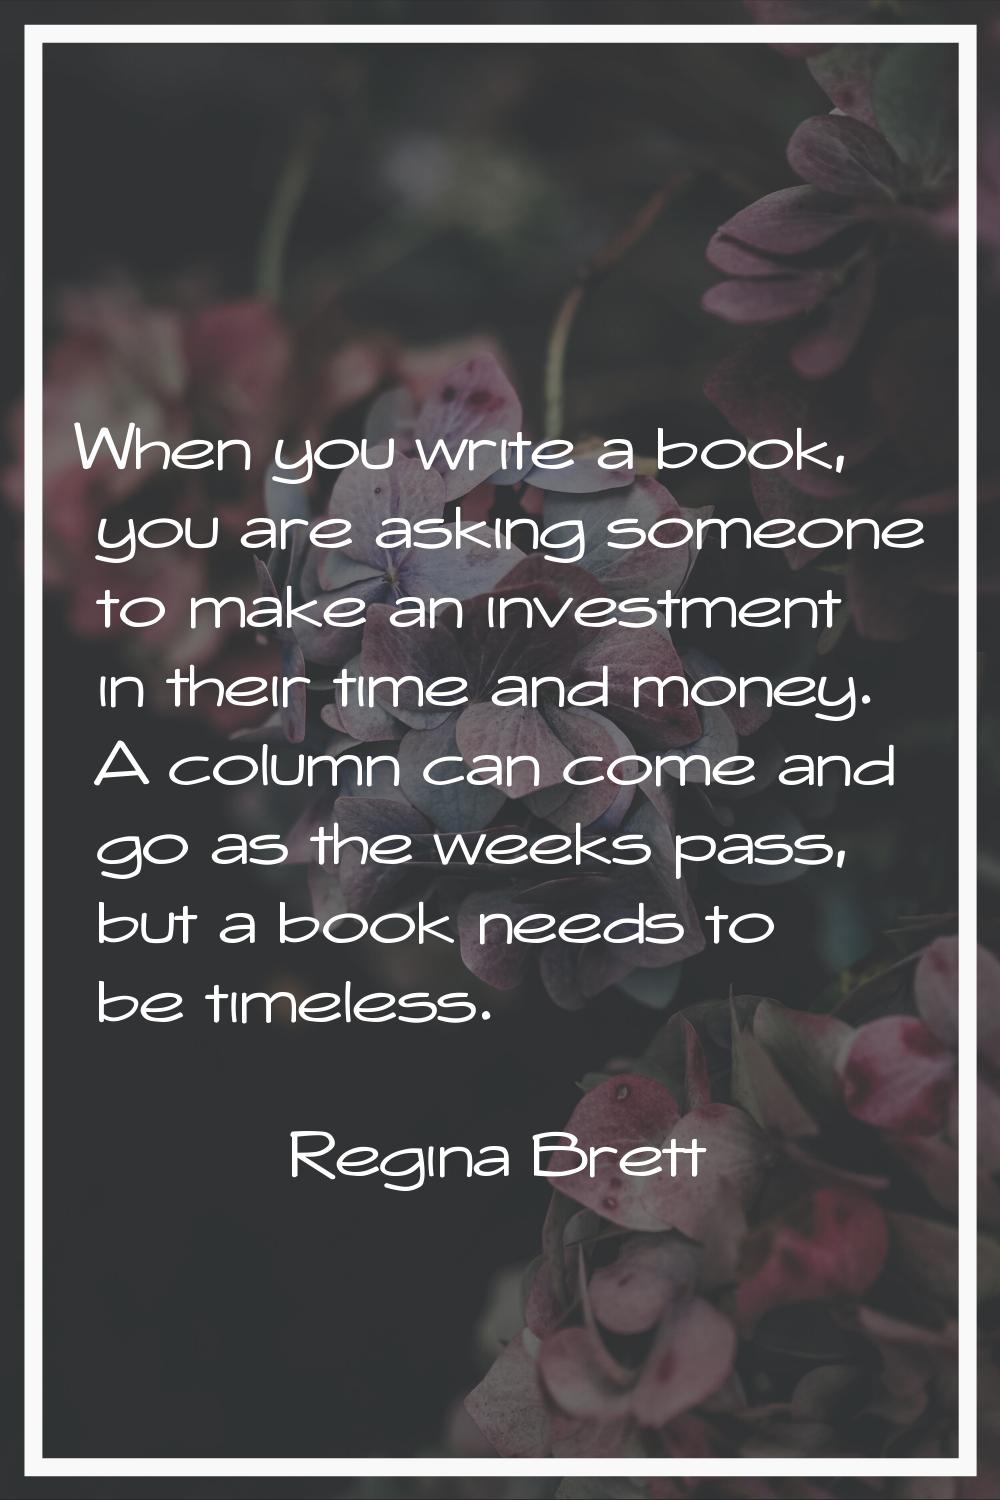 When you write a book, you are asking someone to make an investment in their time and money. A colu